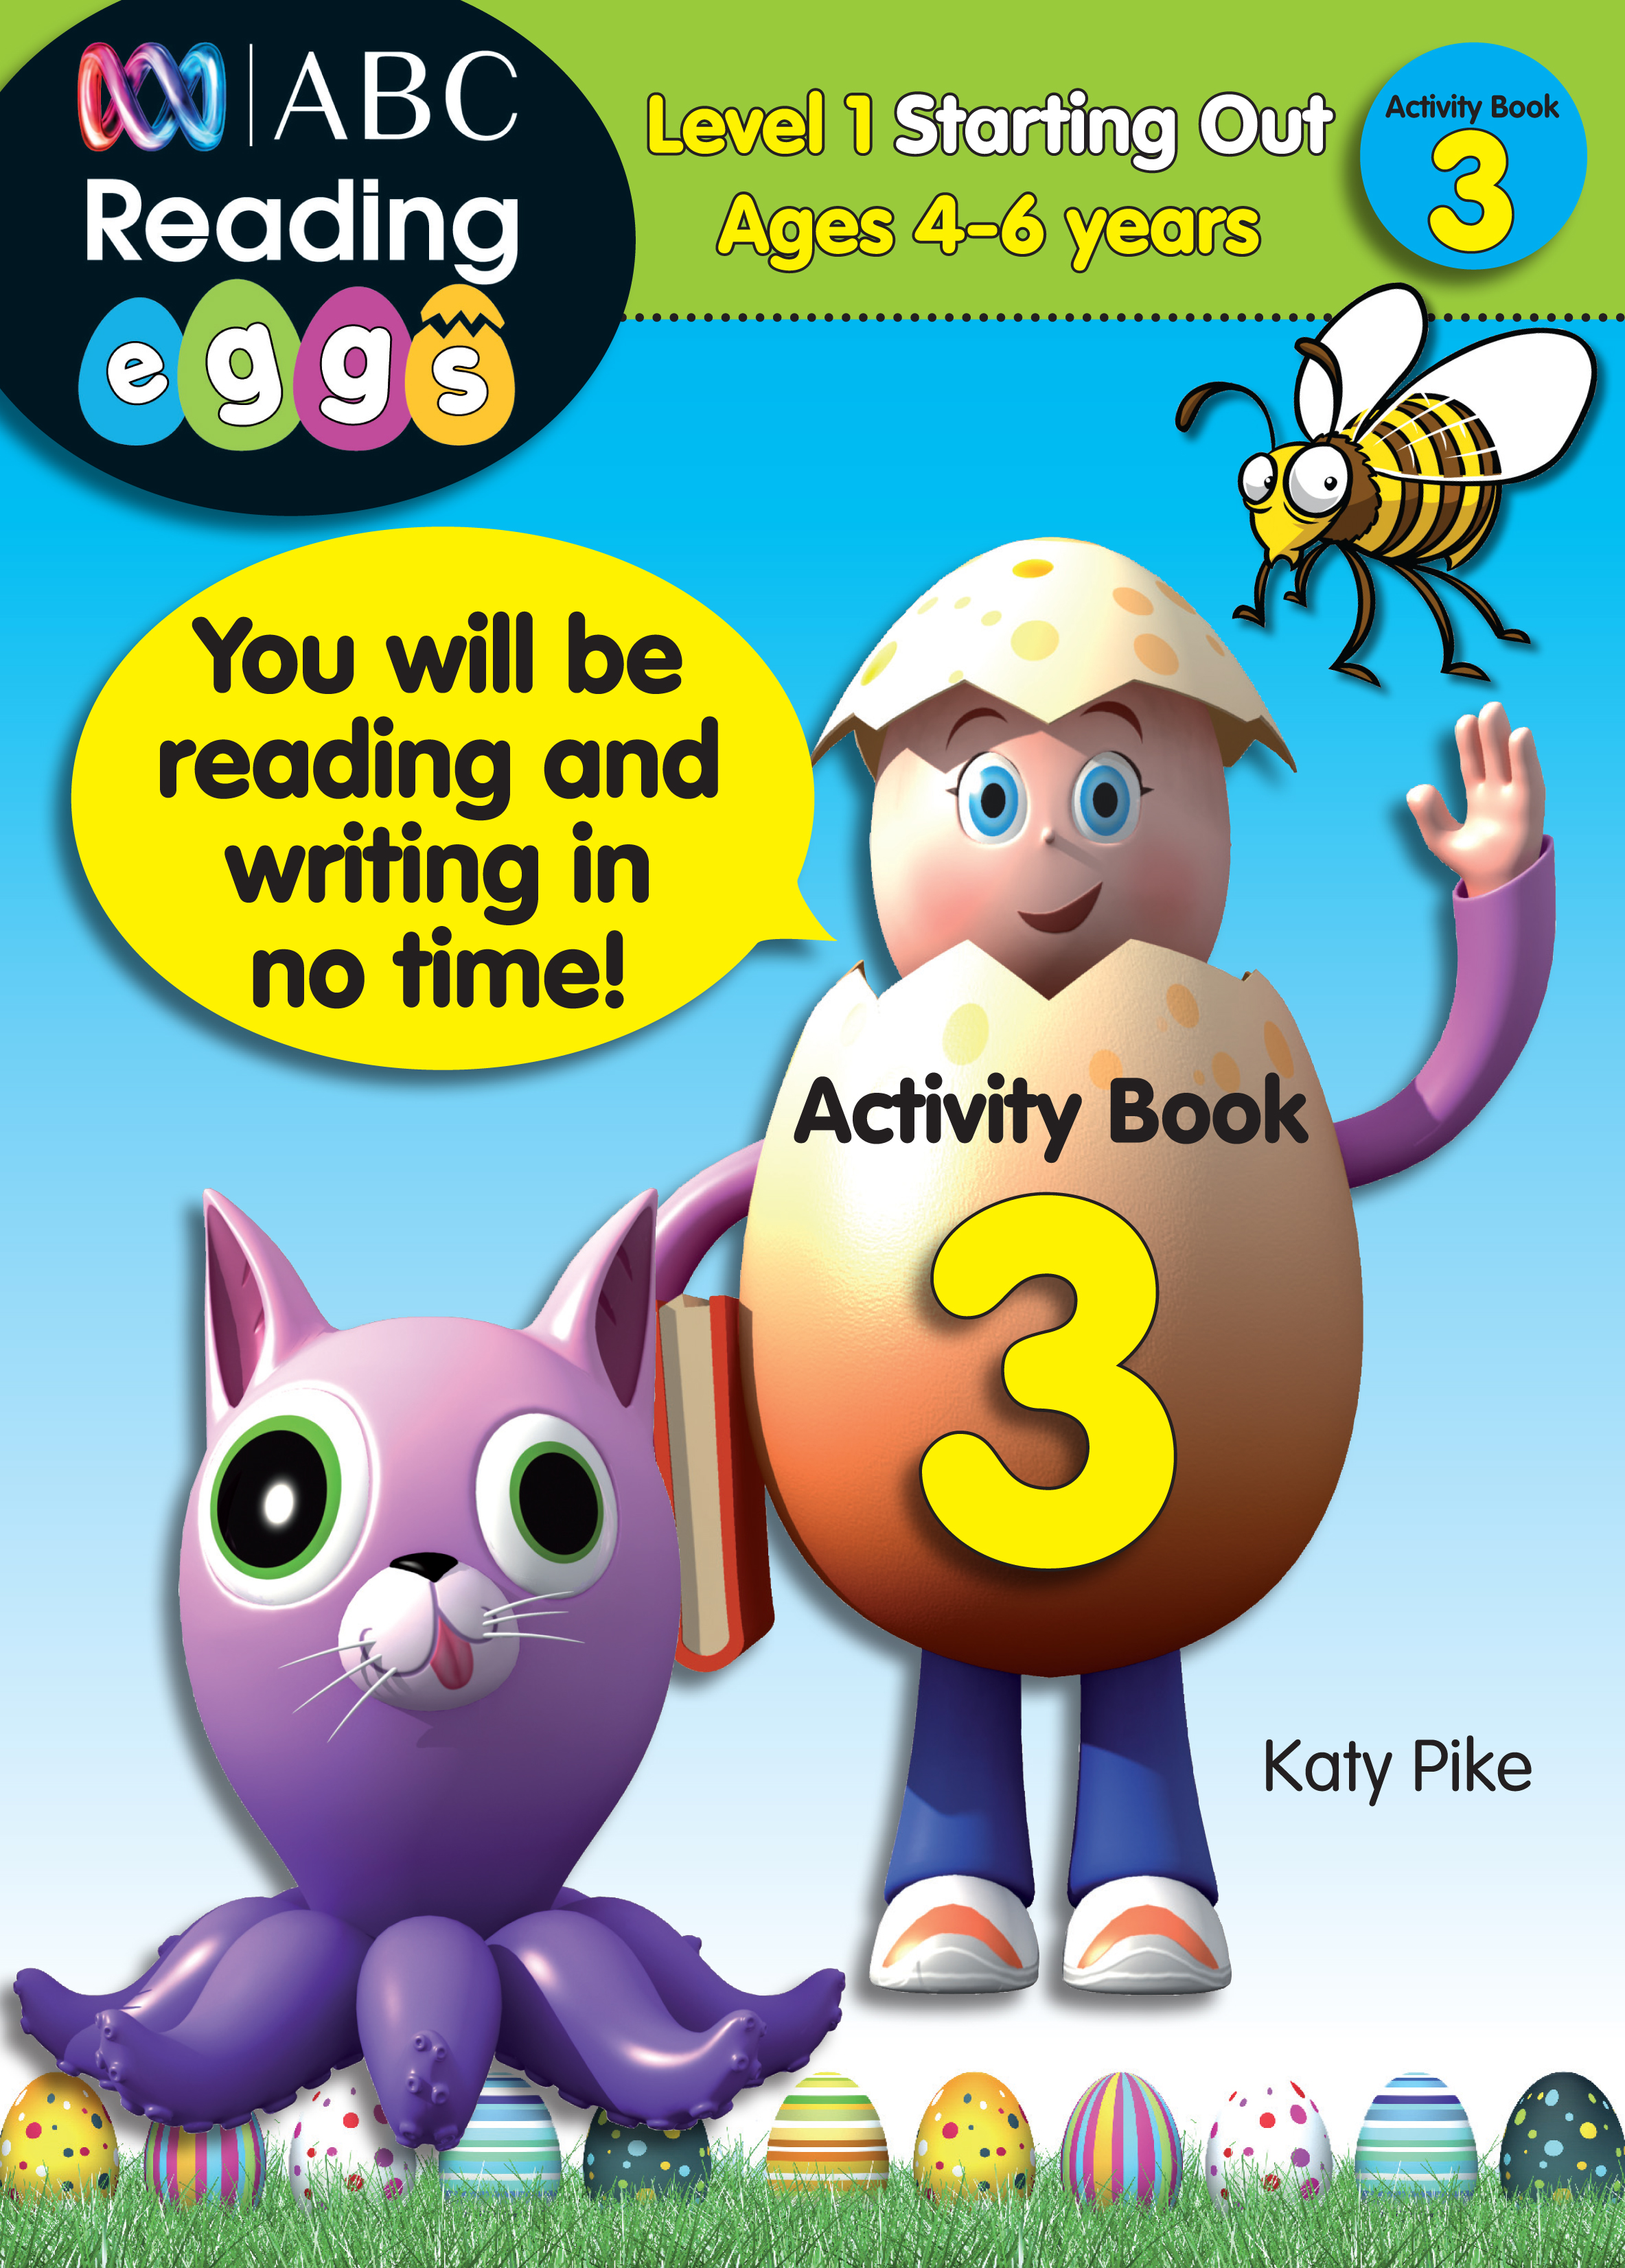 Picture of ABC Reading Eggs Level 1 Starting Out Activity Book 3 Ages 4-6